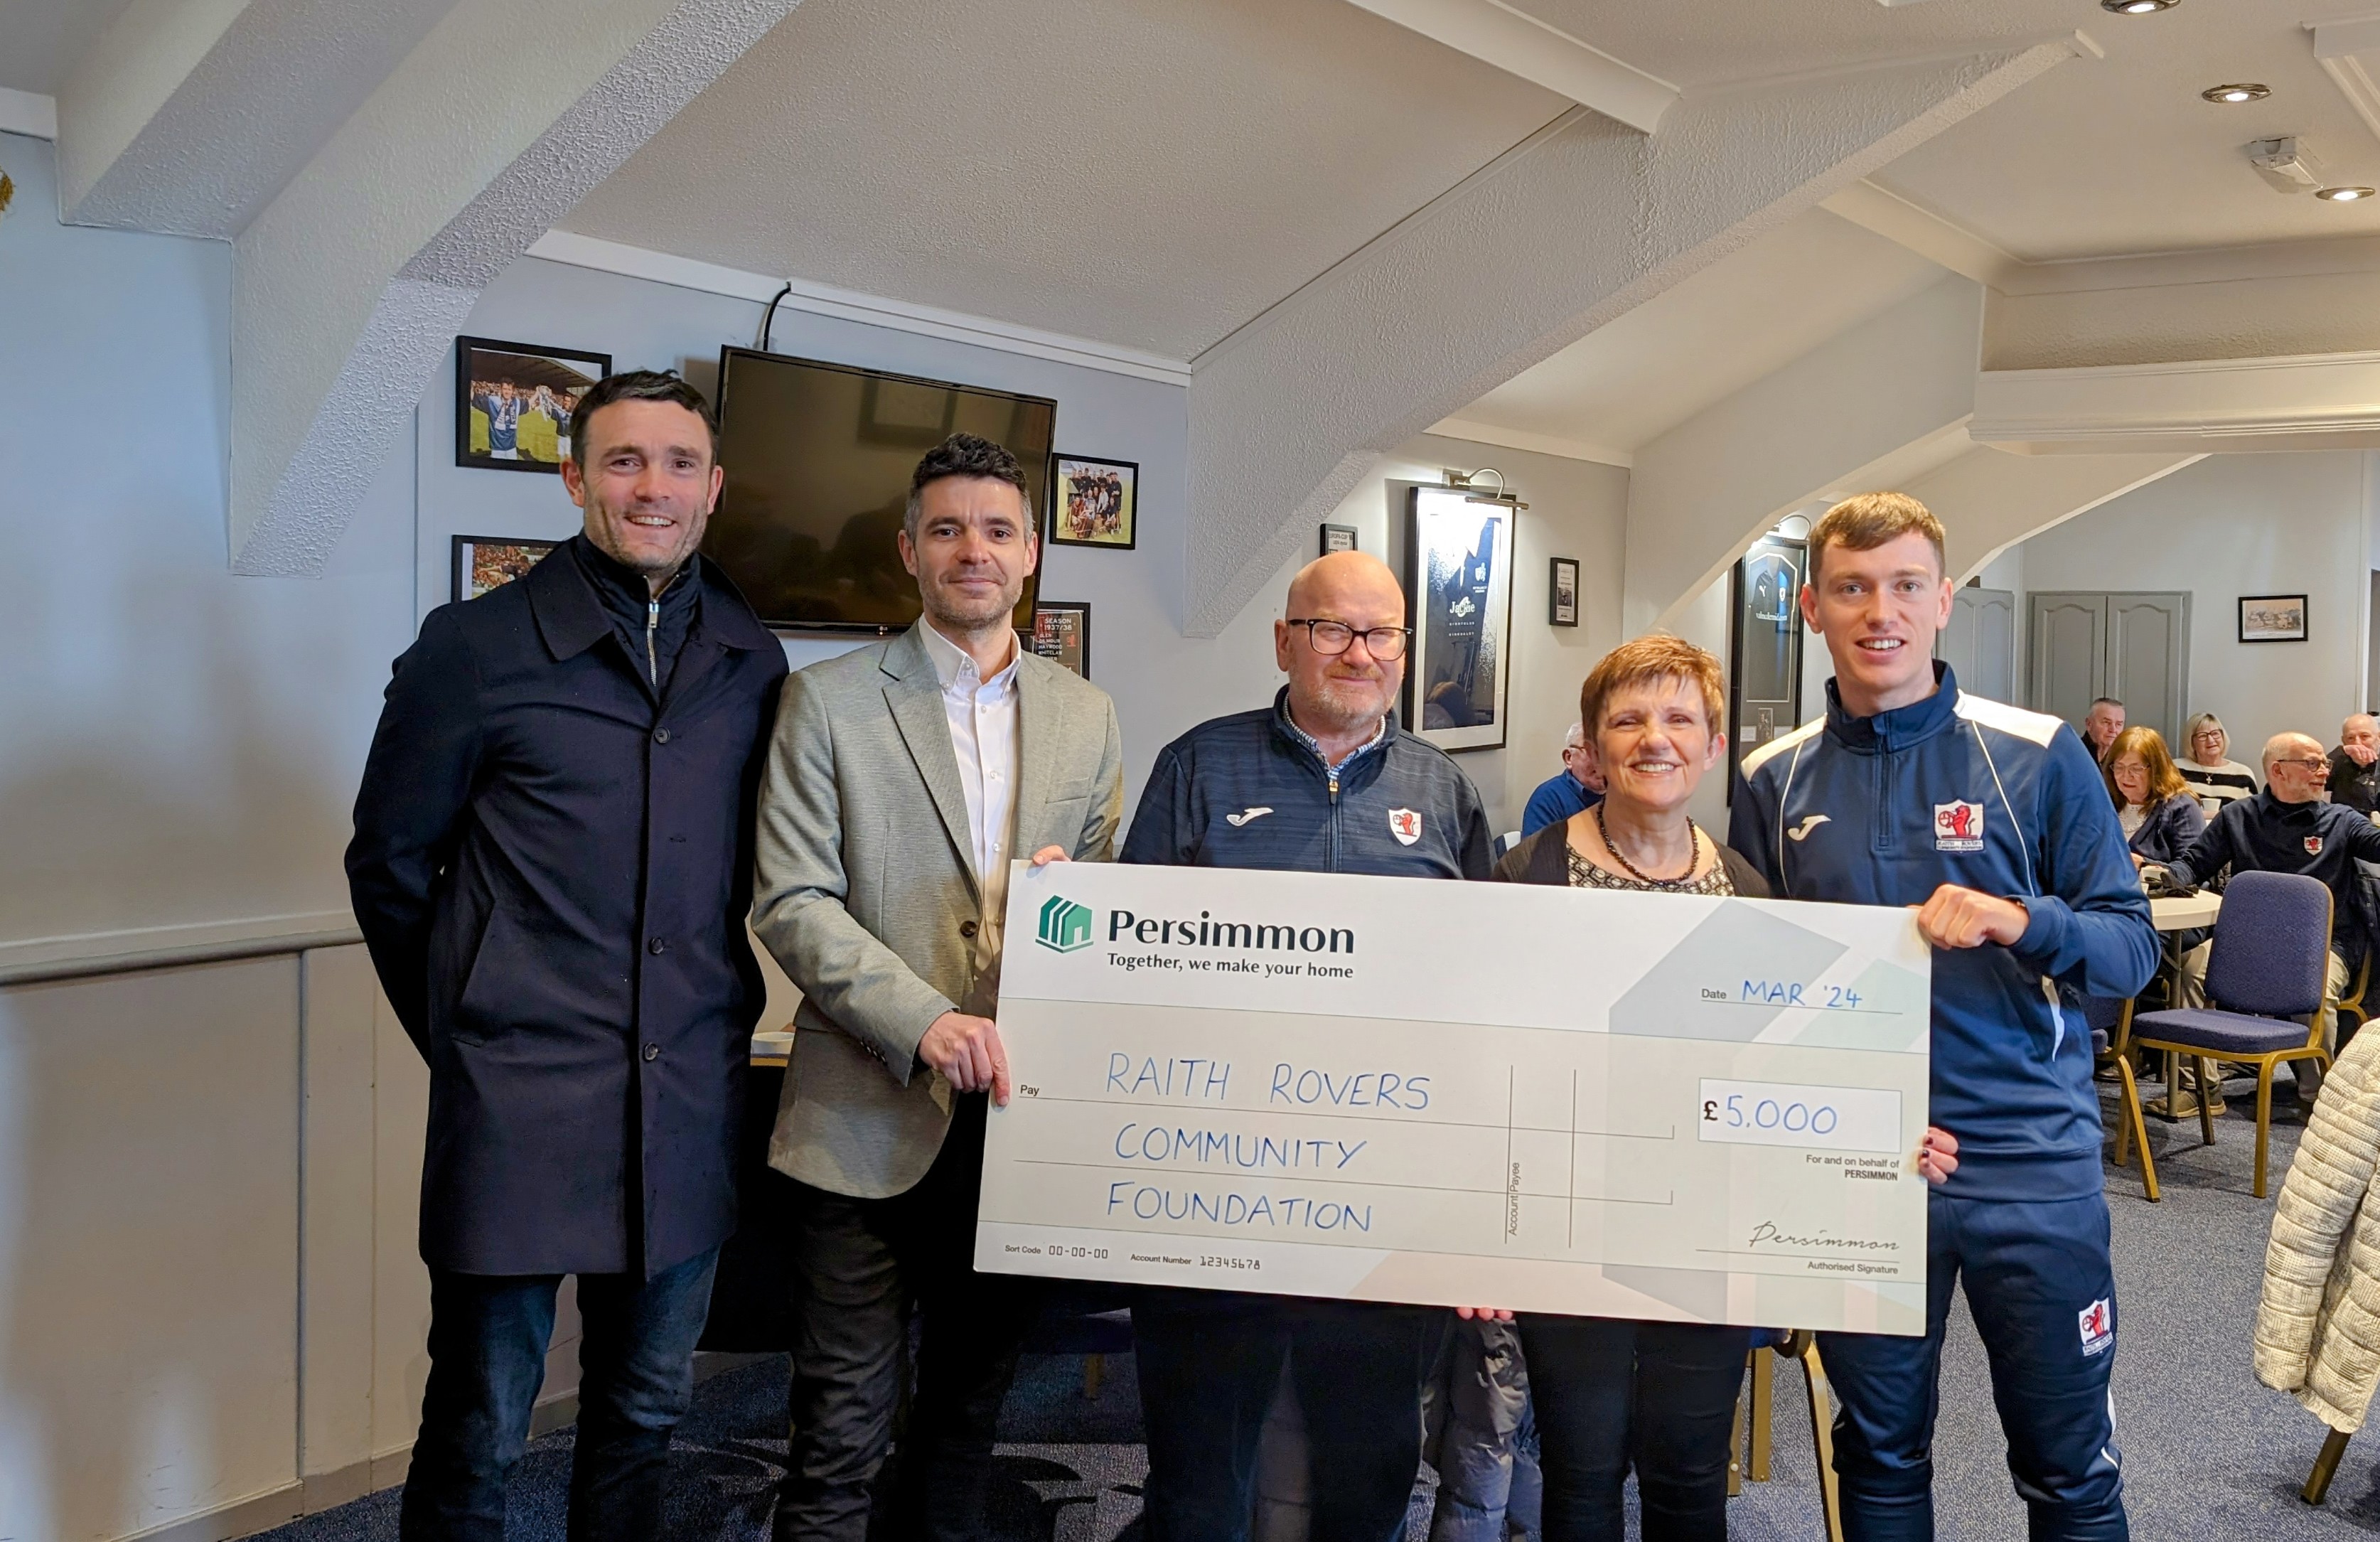 Raith Rovers Community Foundation scores bumper donation from Persimmon